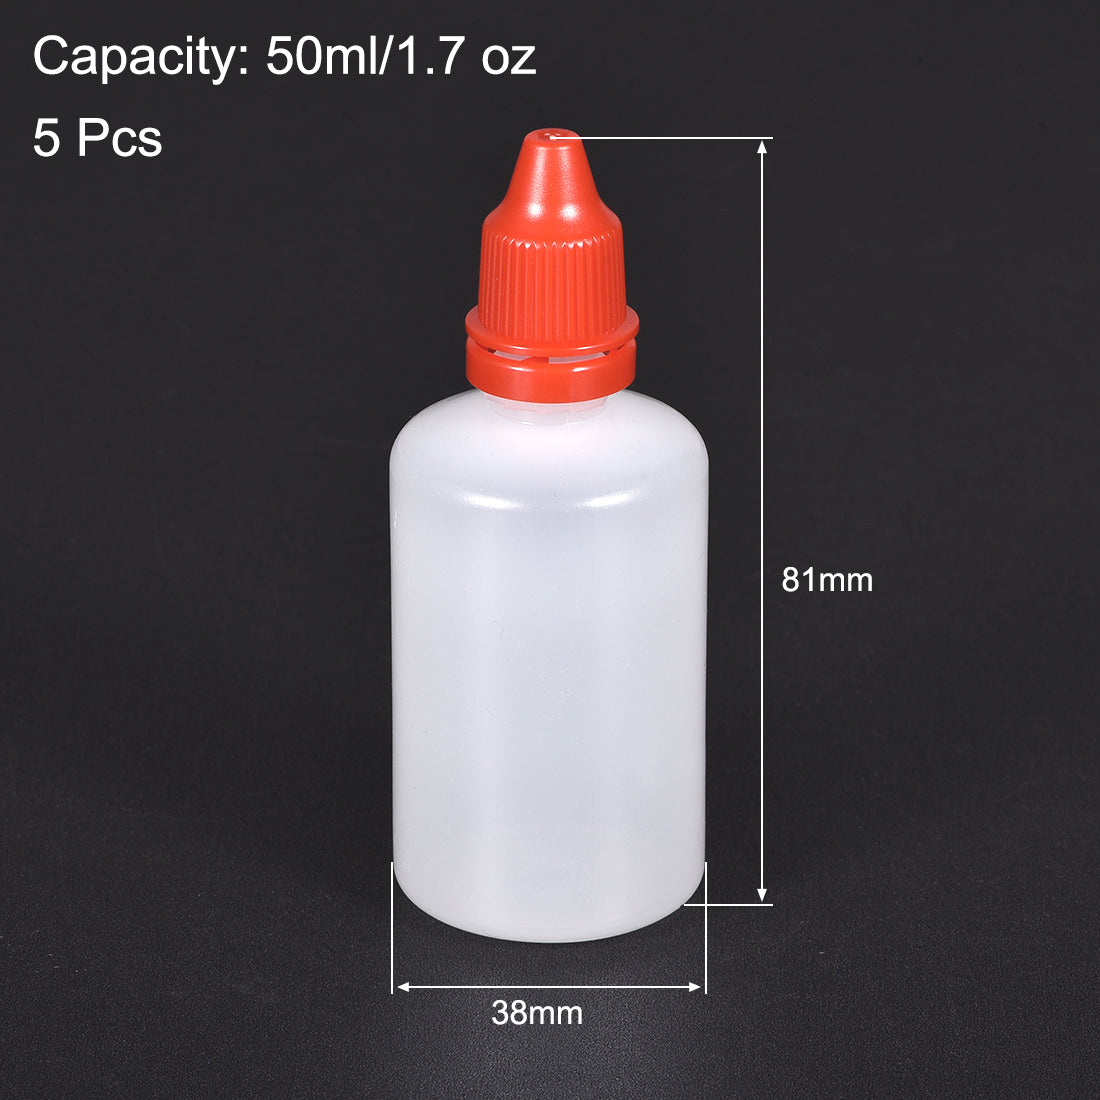 uxcell Uxcell 50ml/1.7 oz Empty Squeezable Dropper Bottle Red 5pcs